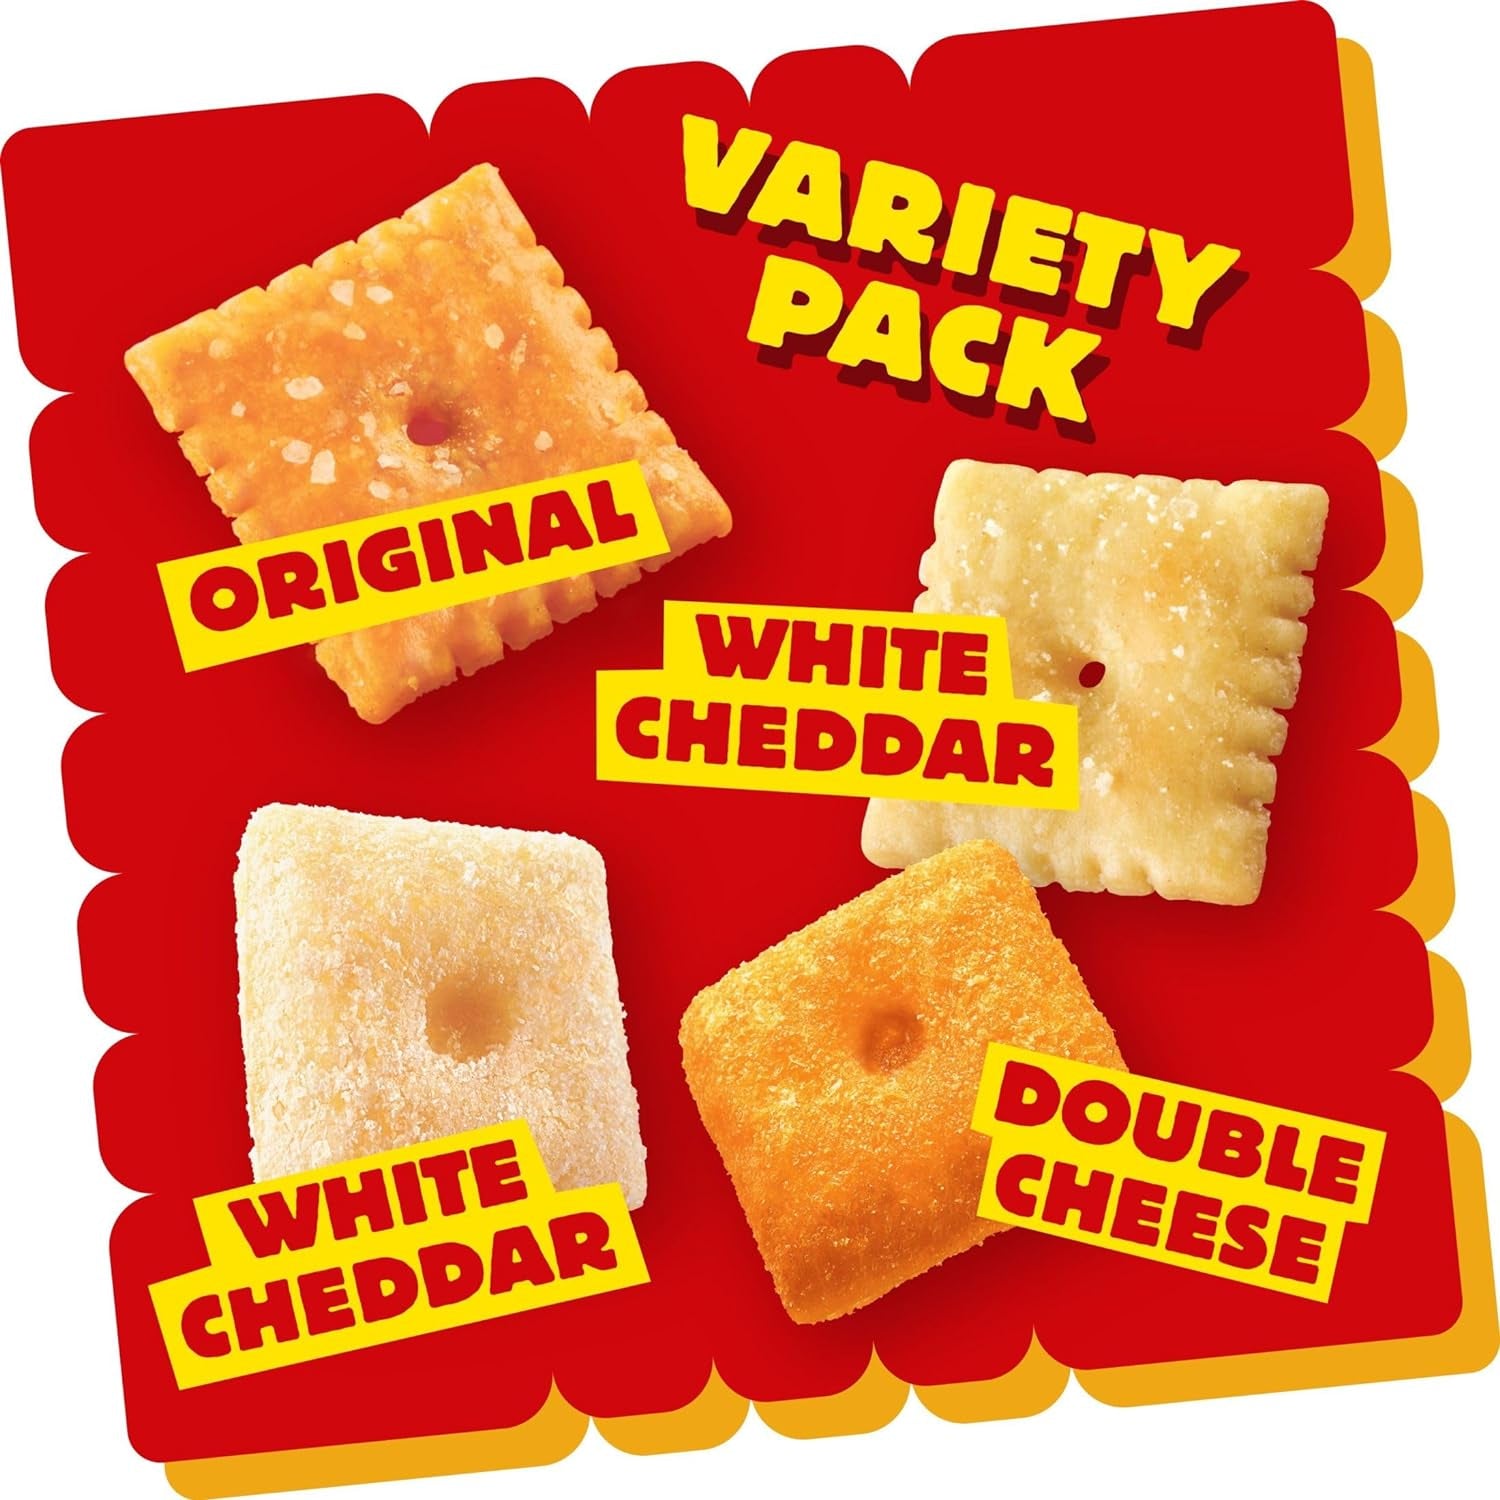 Cheese Crackers, Baked Snack Crackers, Lunch Snacks, Variety Pack (40 Pouches)